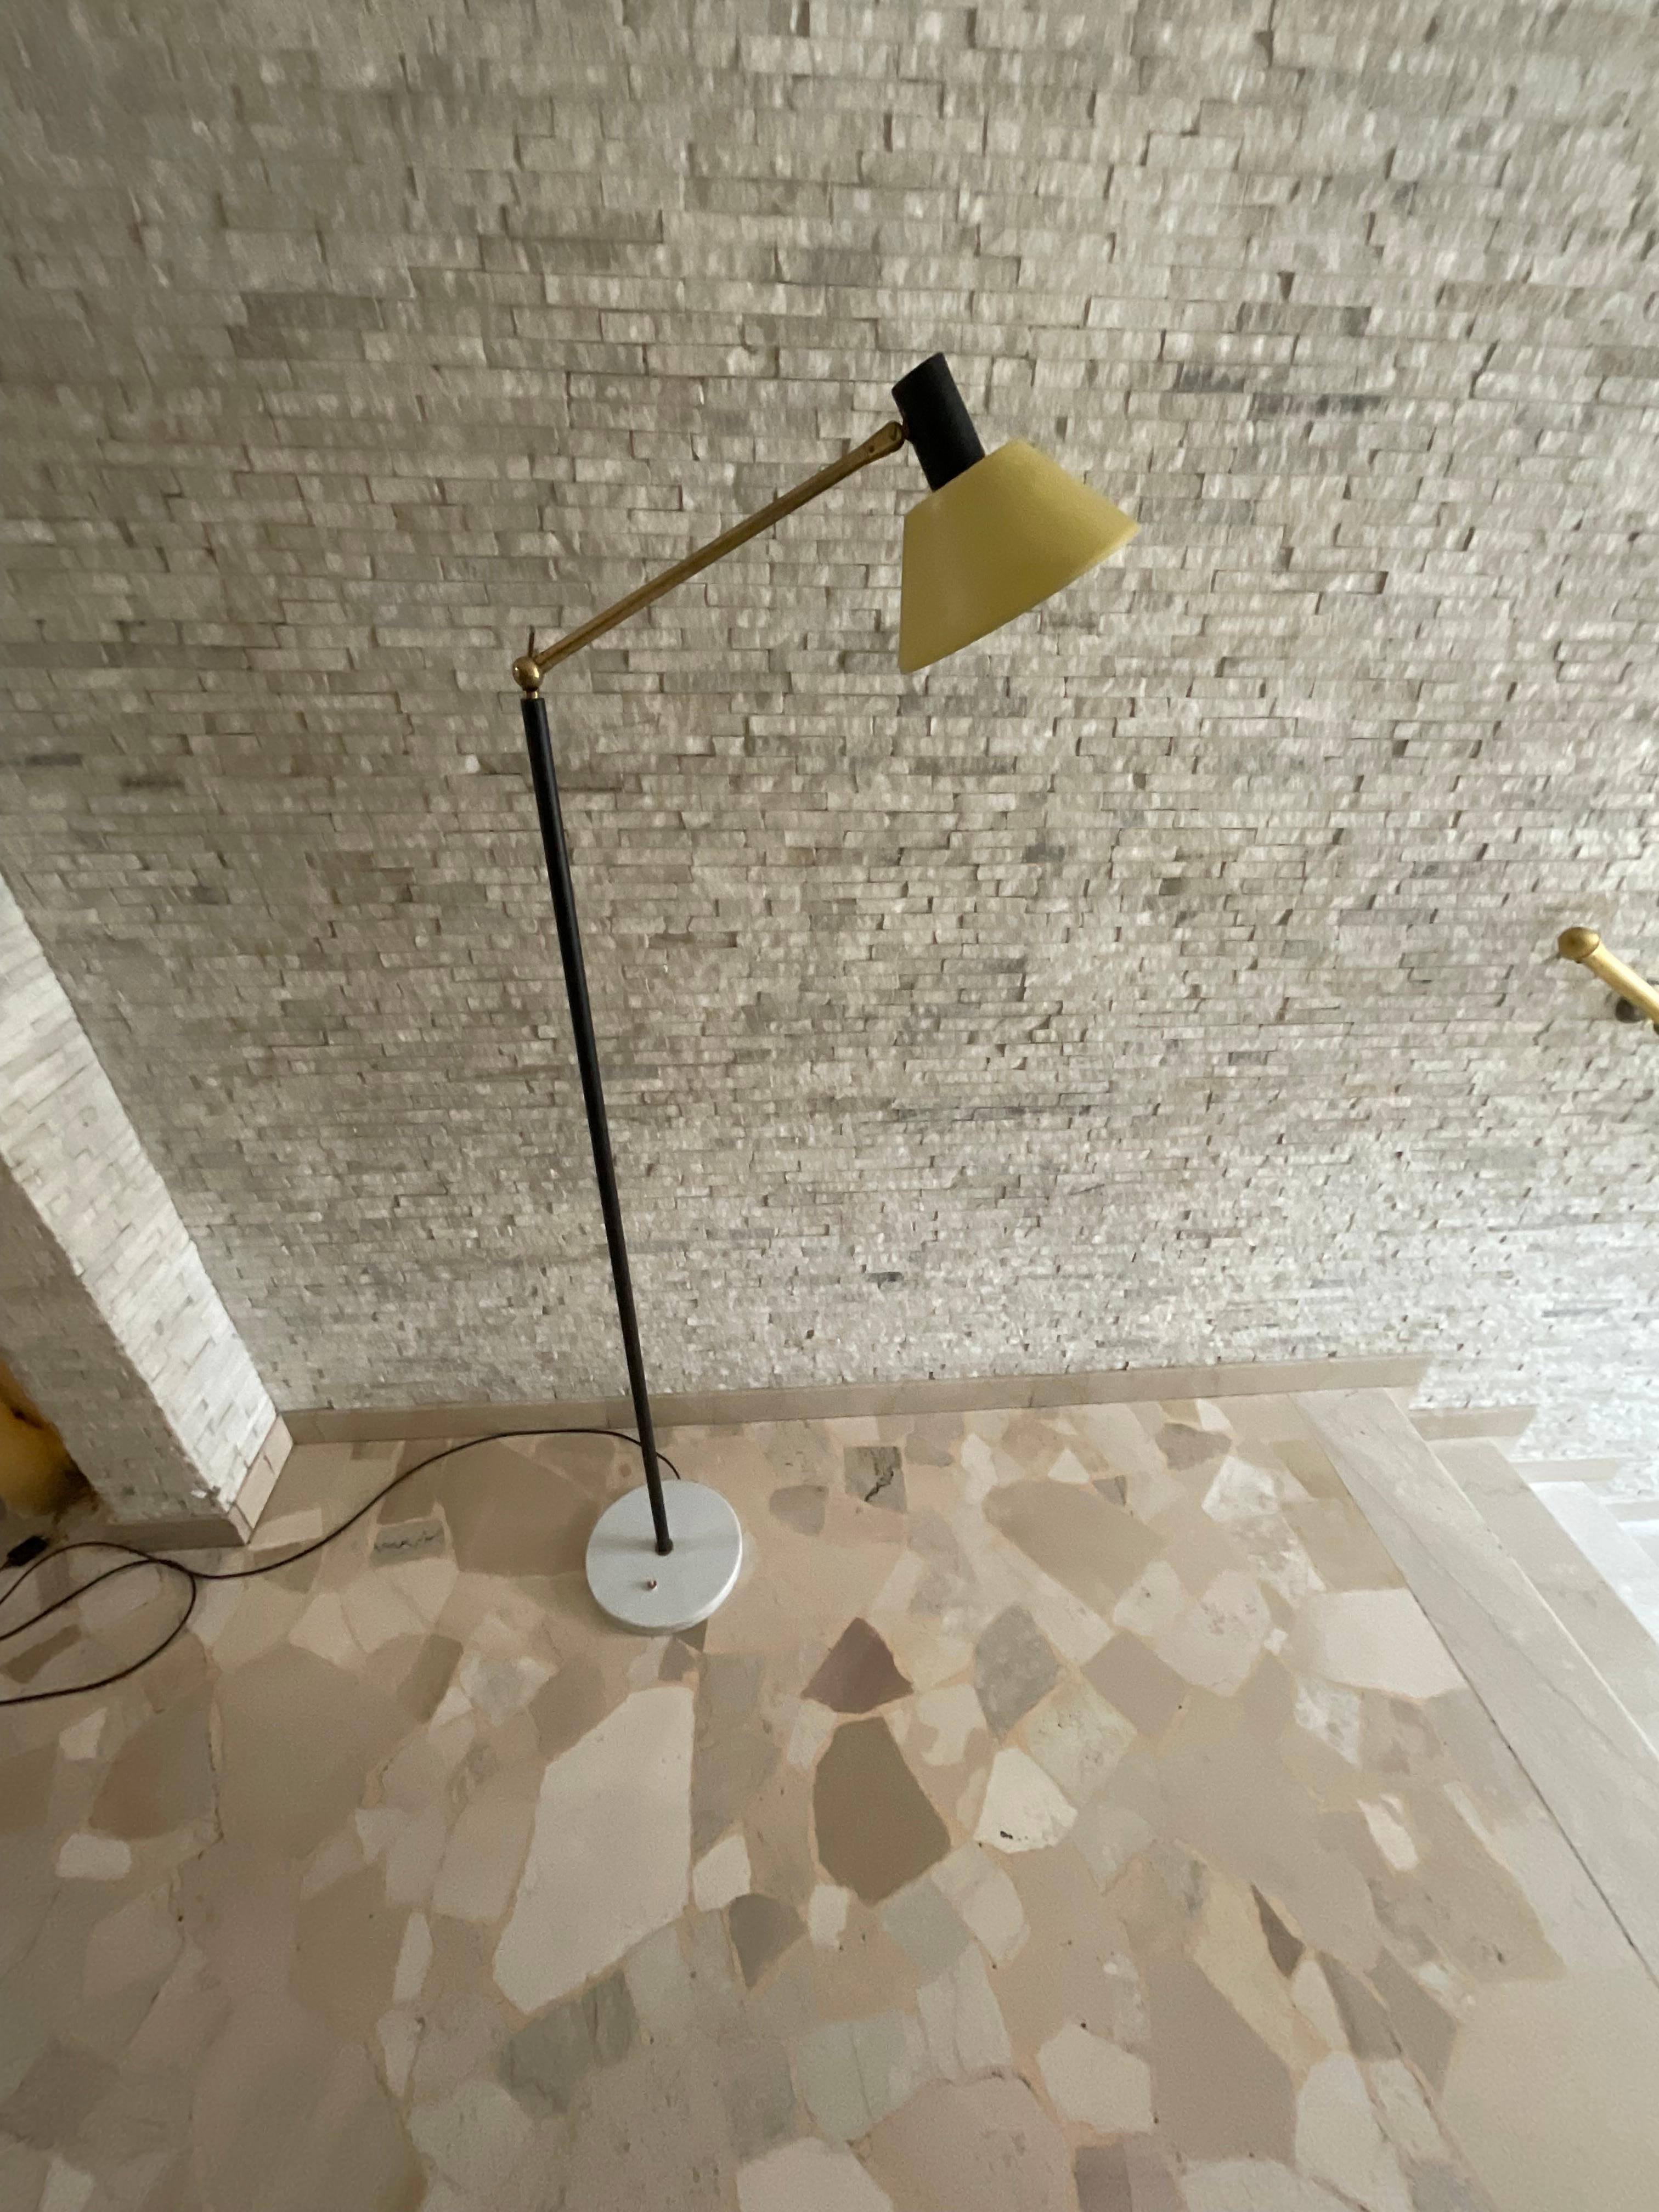 STILUX - Original floor lamp from 1950 in perfect condition, working, color is materials of the era , also bears the Stilux Made in Italy mark in the shade.
Studied in all details from materials of construction; brass,  yellow and black painted